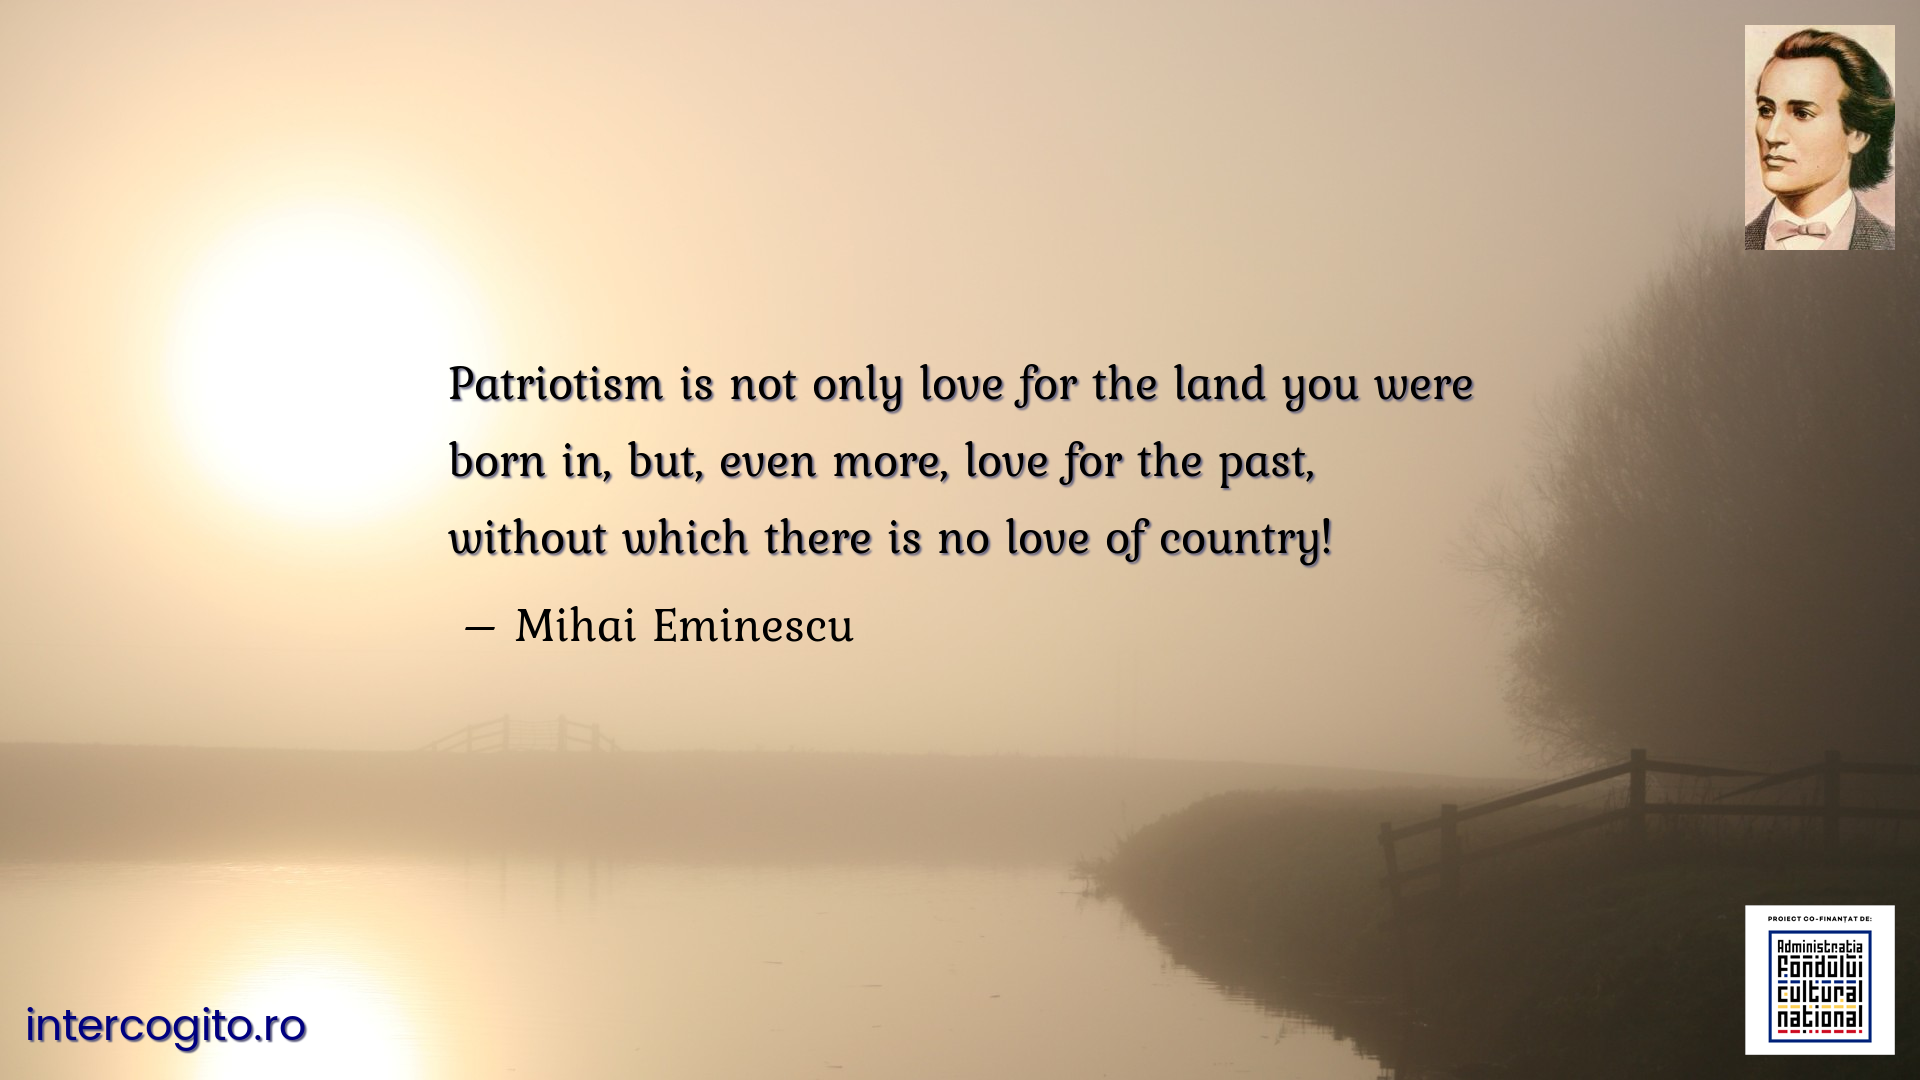 Patriotism is not only love for the land you were born in, but, even more, love for the past, without which there is no love of country!